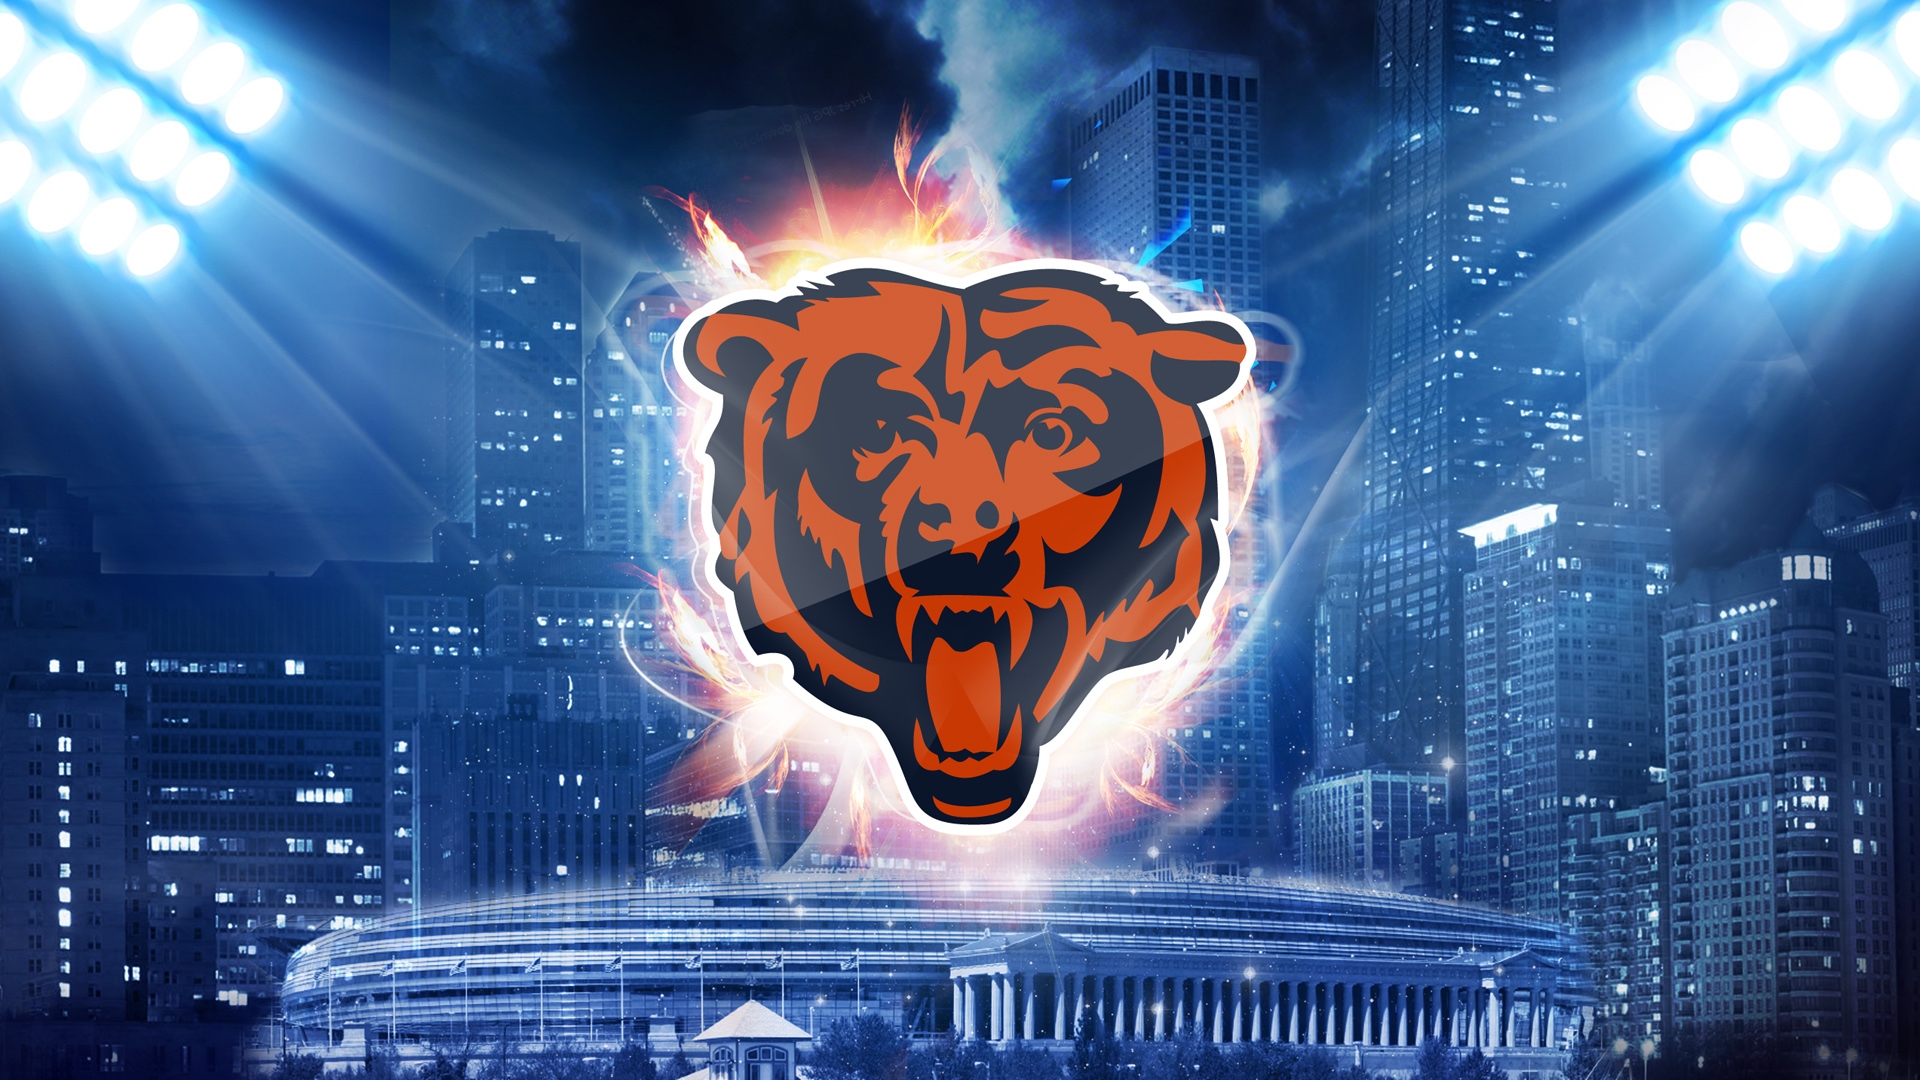 Chicago Bears 2013 Wallpapers